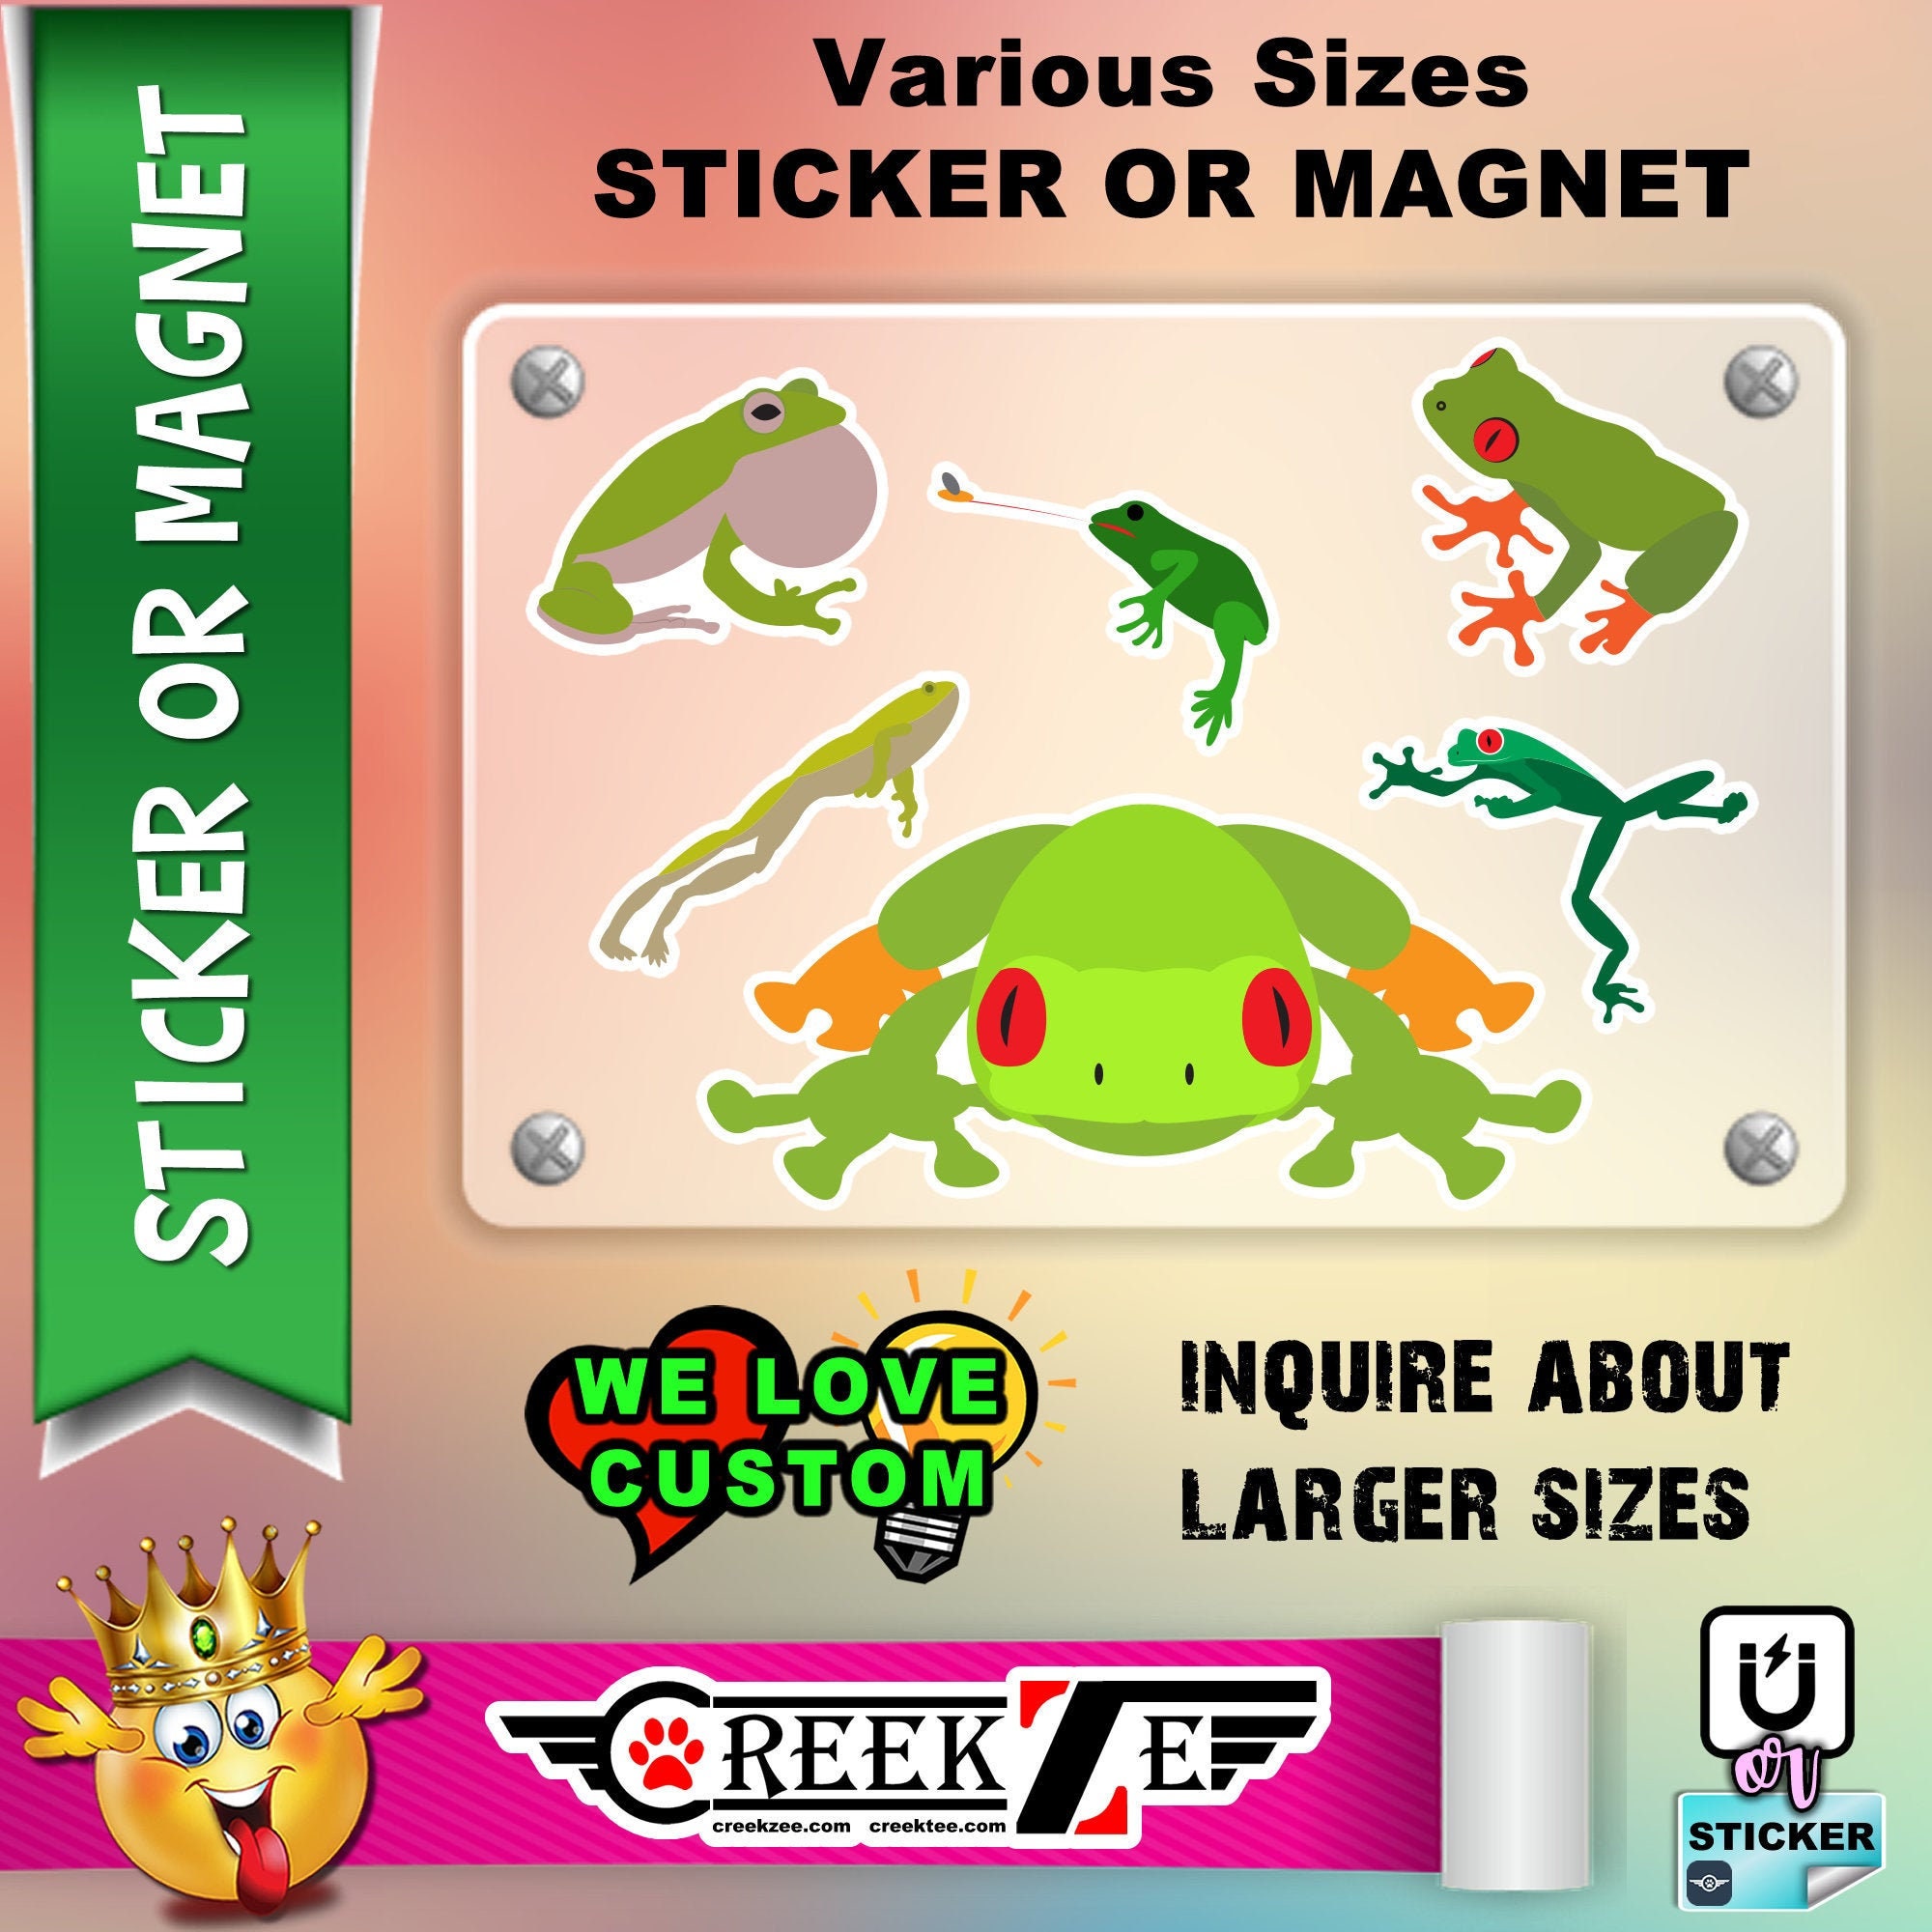 6 Frog stickers in standard, photo or vinyl print materials with laminate or magnet options available.  Premium.